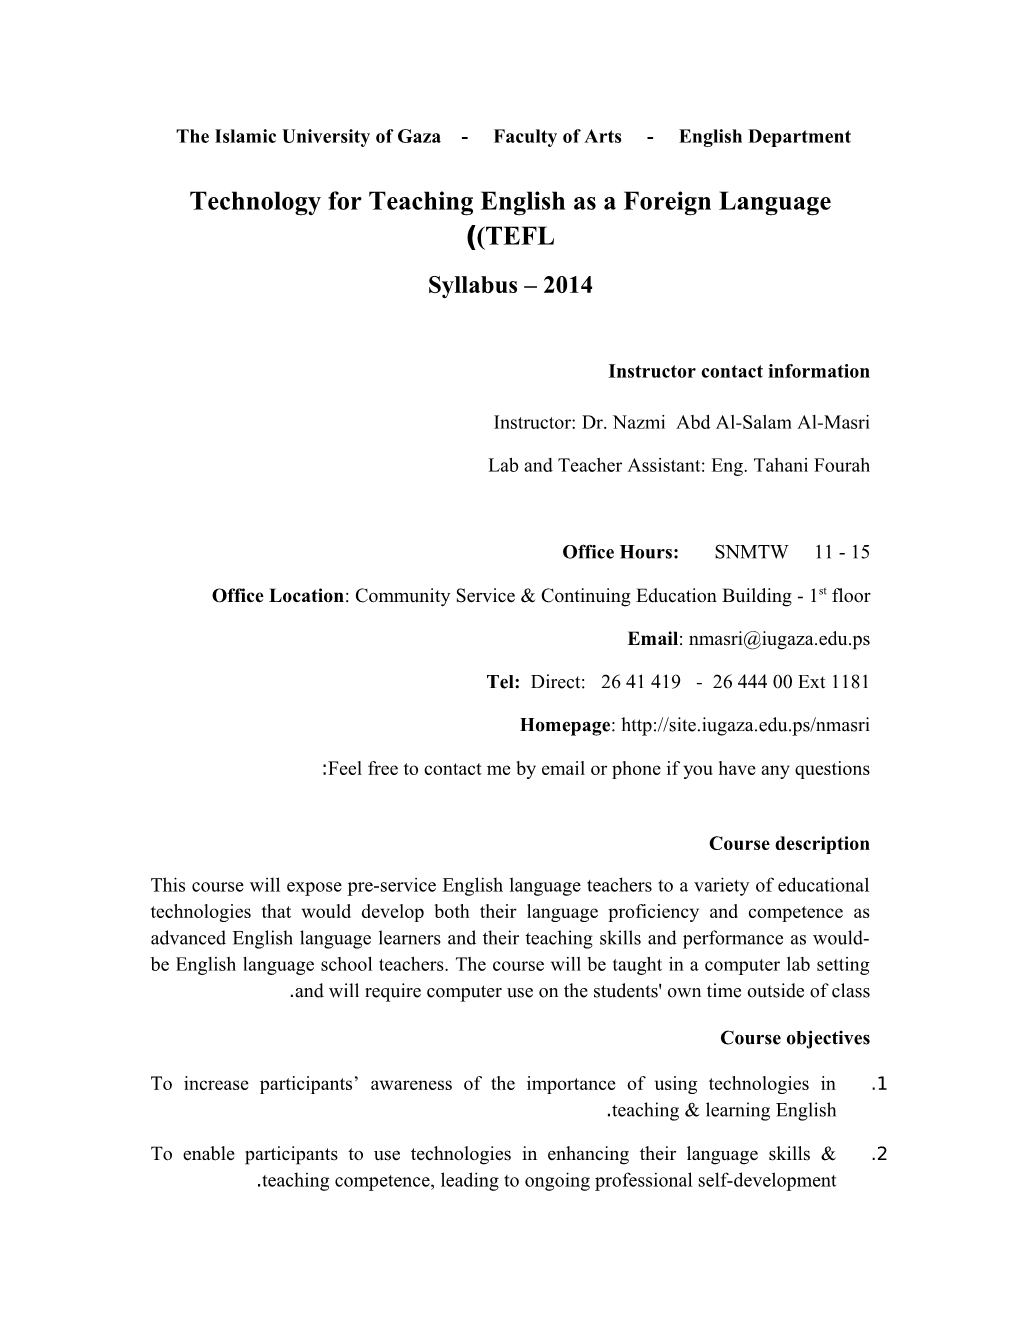 Technology for Teaching English As a Foreign Language (TEFL)